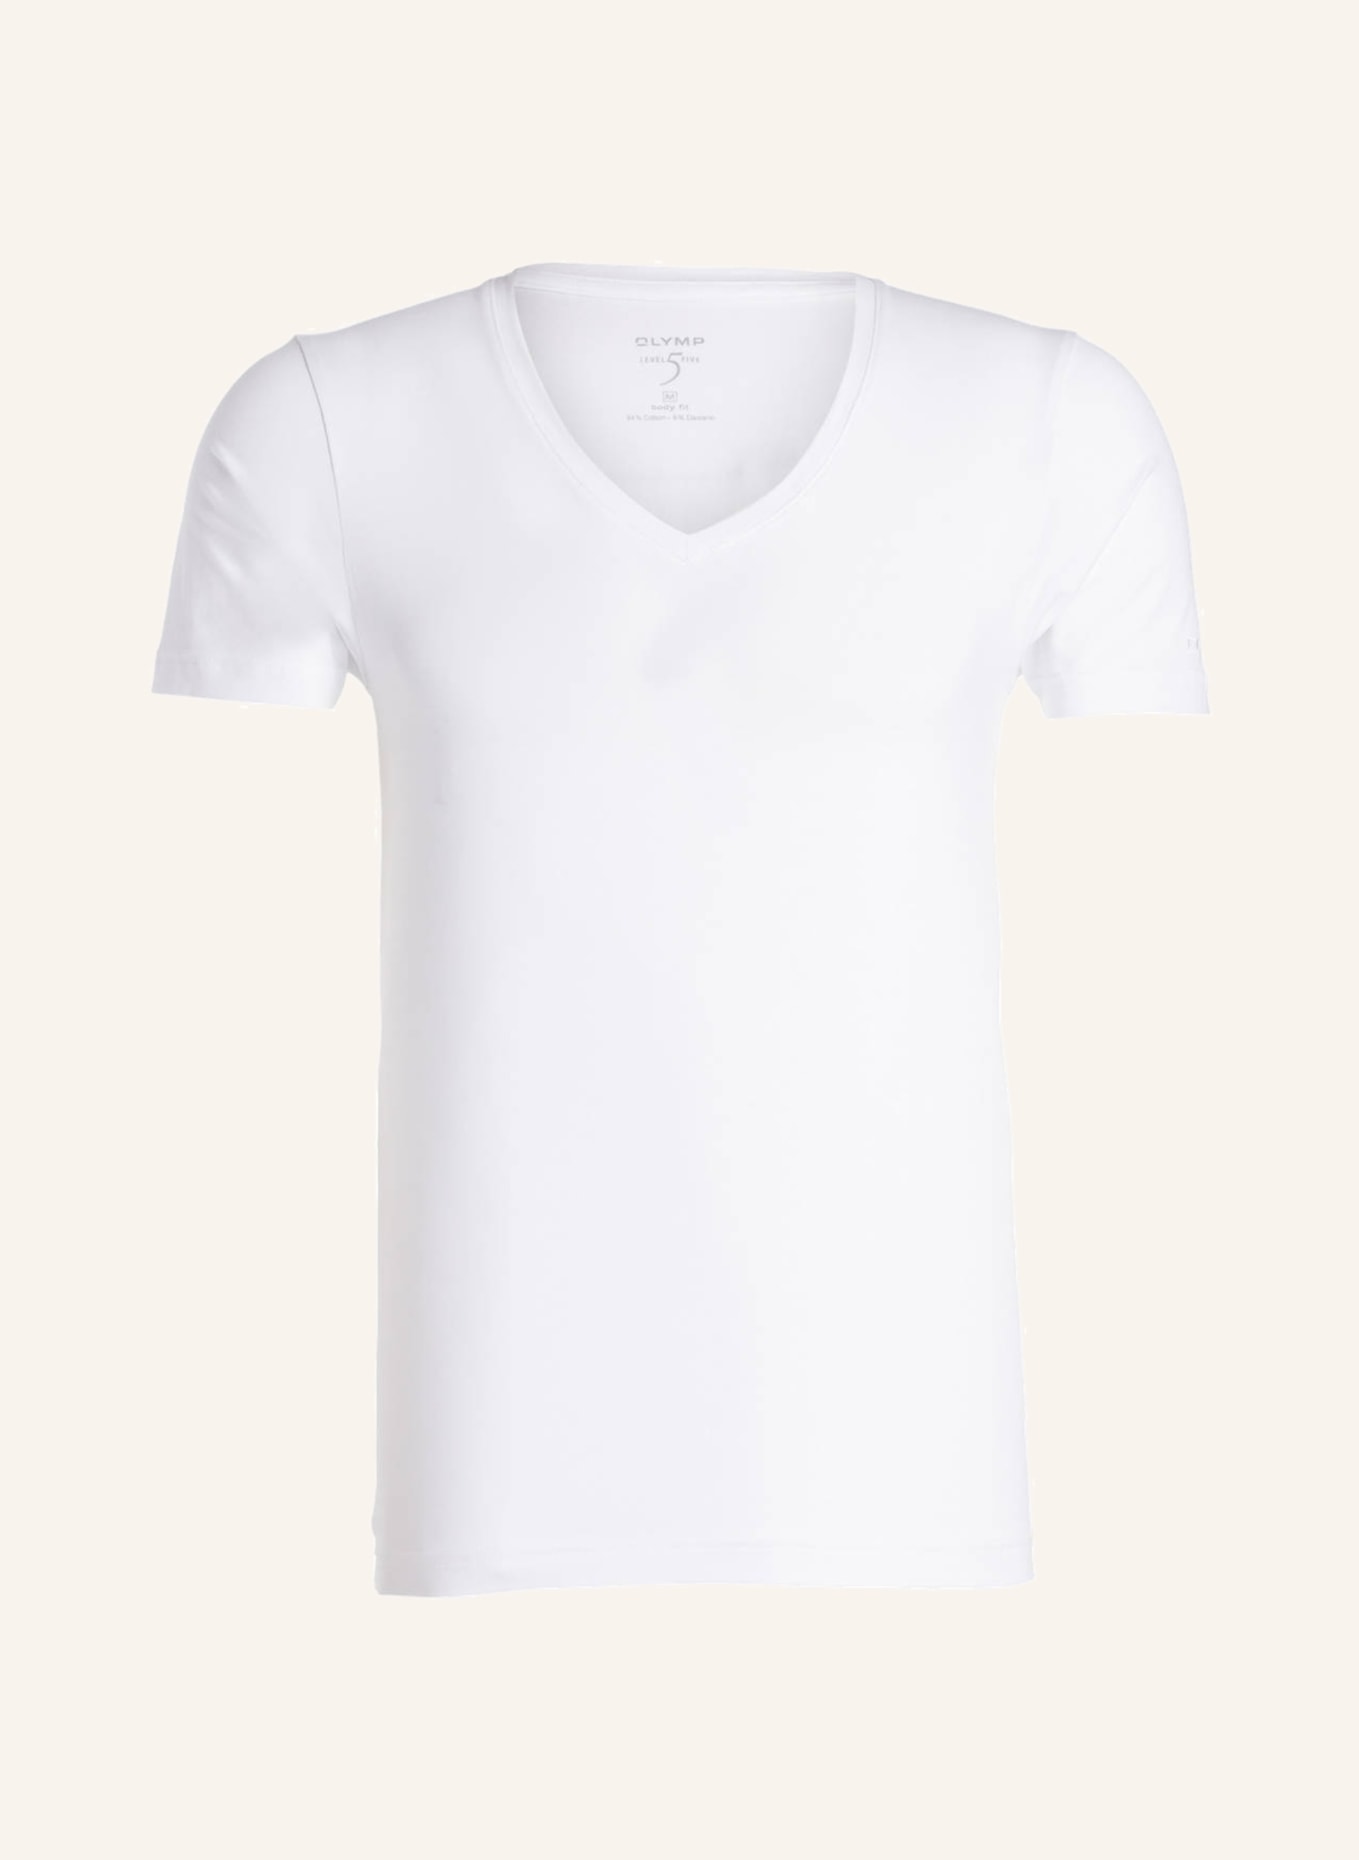 OLYMP T-Shirt Level Five body fit, Farbe: WEISS (Bild 1)